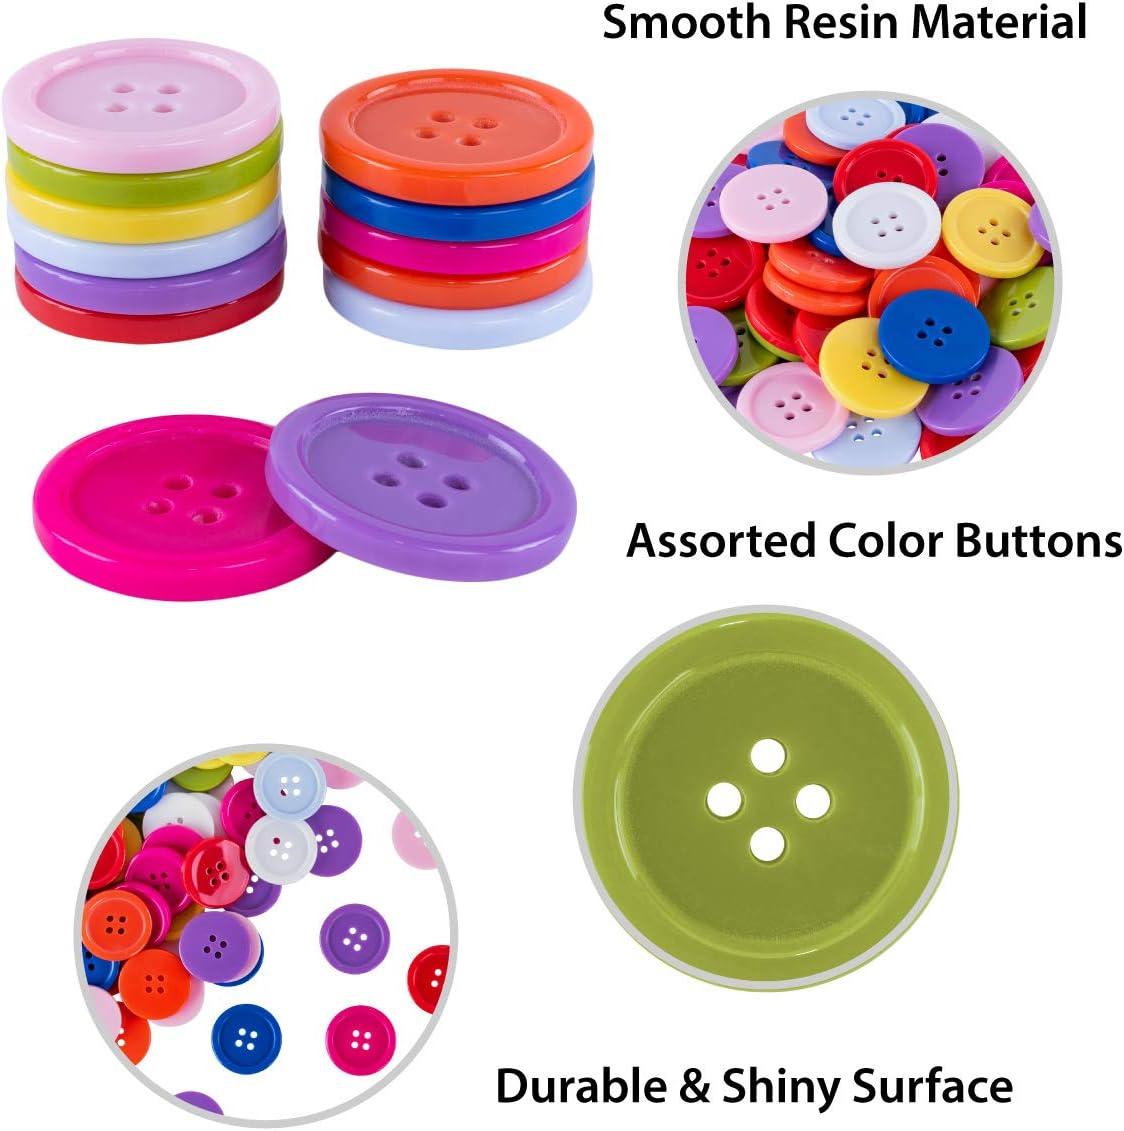 Mixed Buttons / Plastic Buttons / Assorted Buttons & Shapes / Arts & Crafts